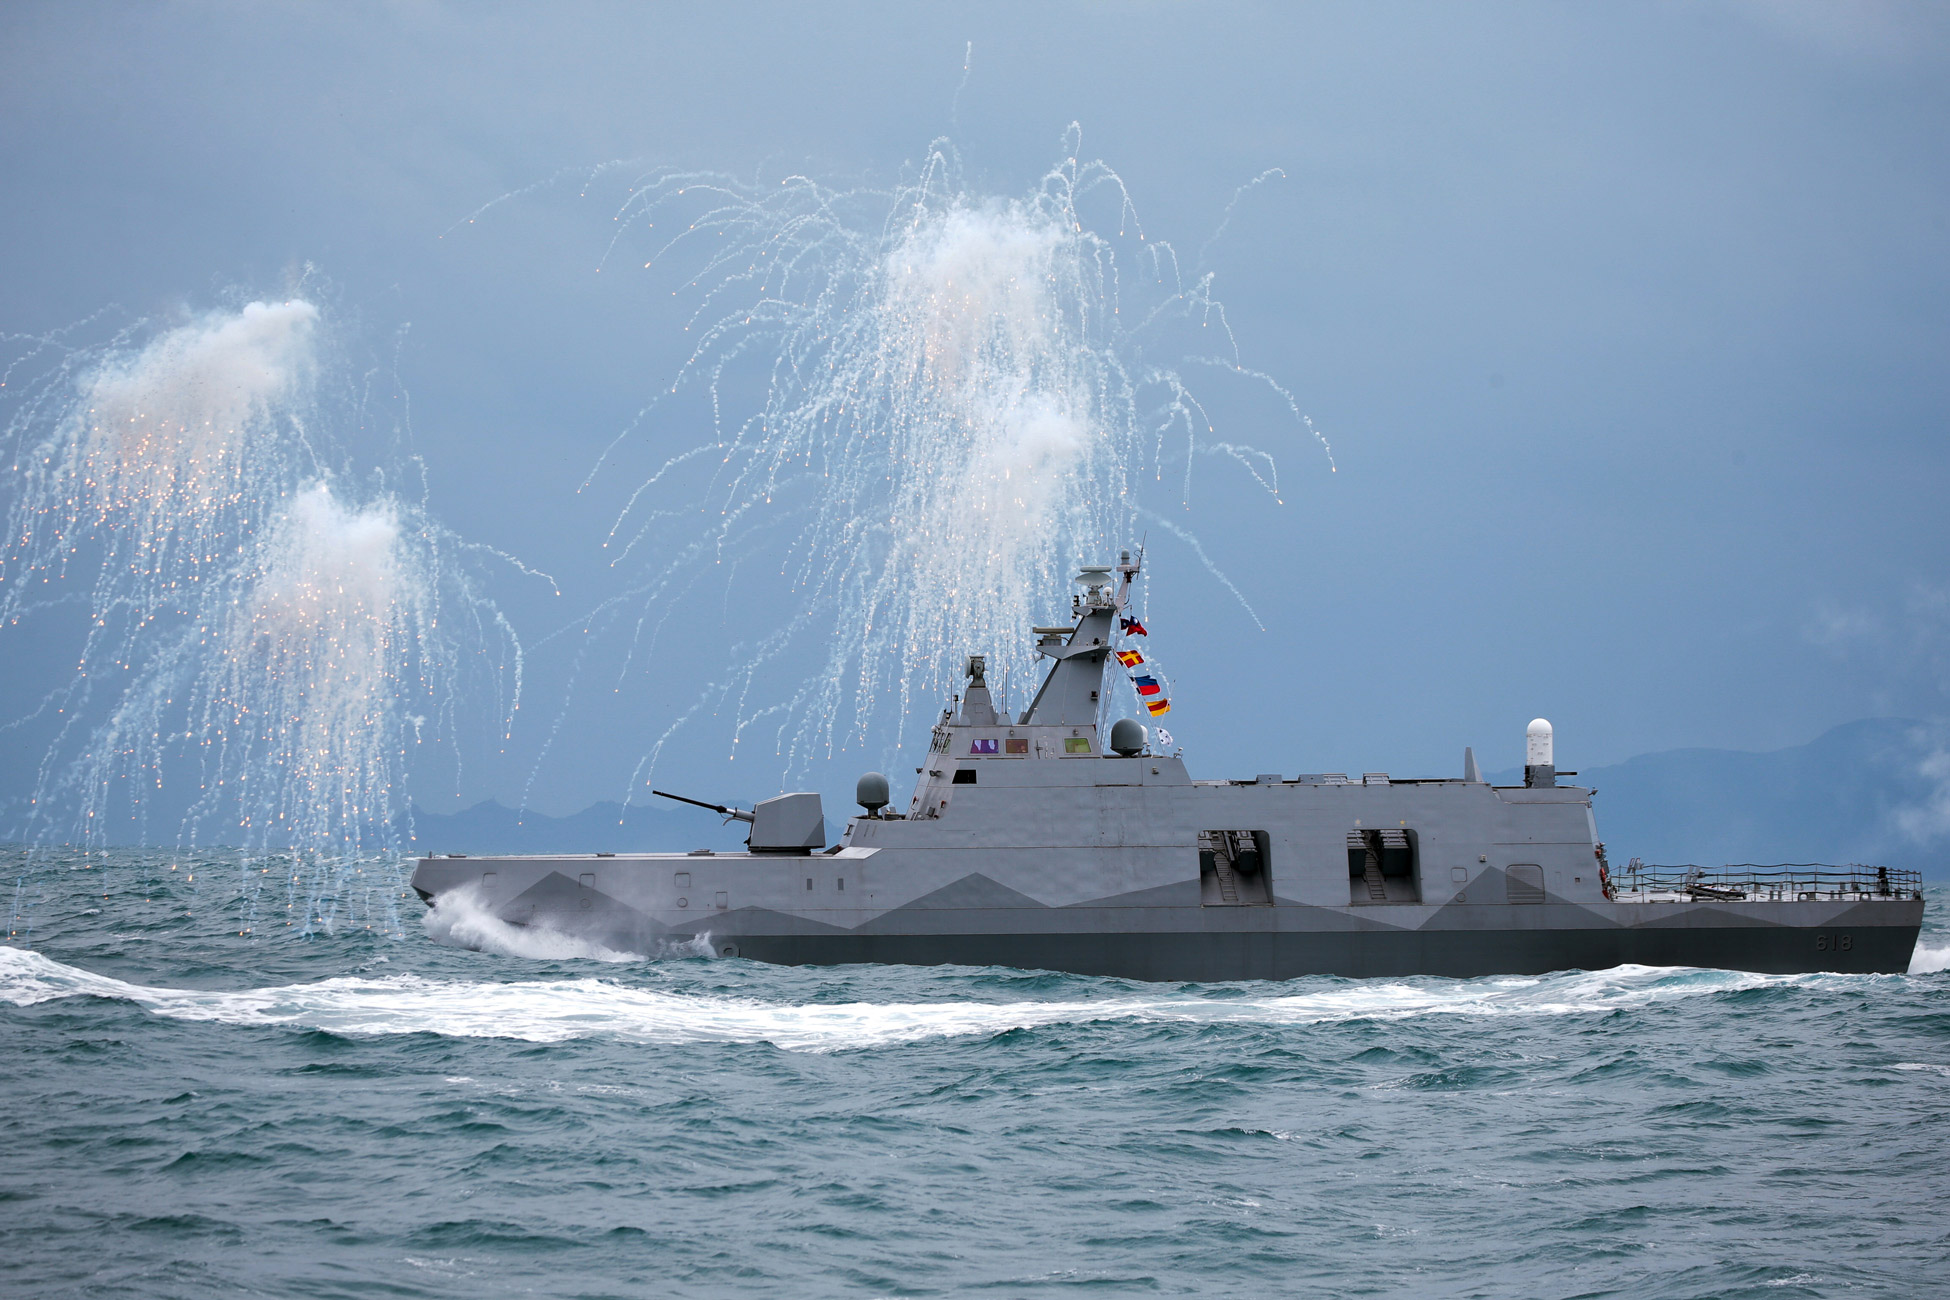 A Taiwan Navy Tuo Chiang-class corvette shoots decoy flares during a military exercise off the shore in Keelung, Taiwan, on Jan. 7.